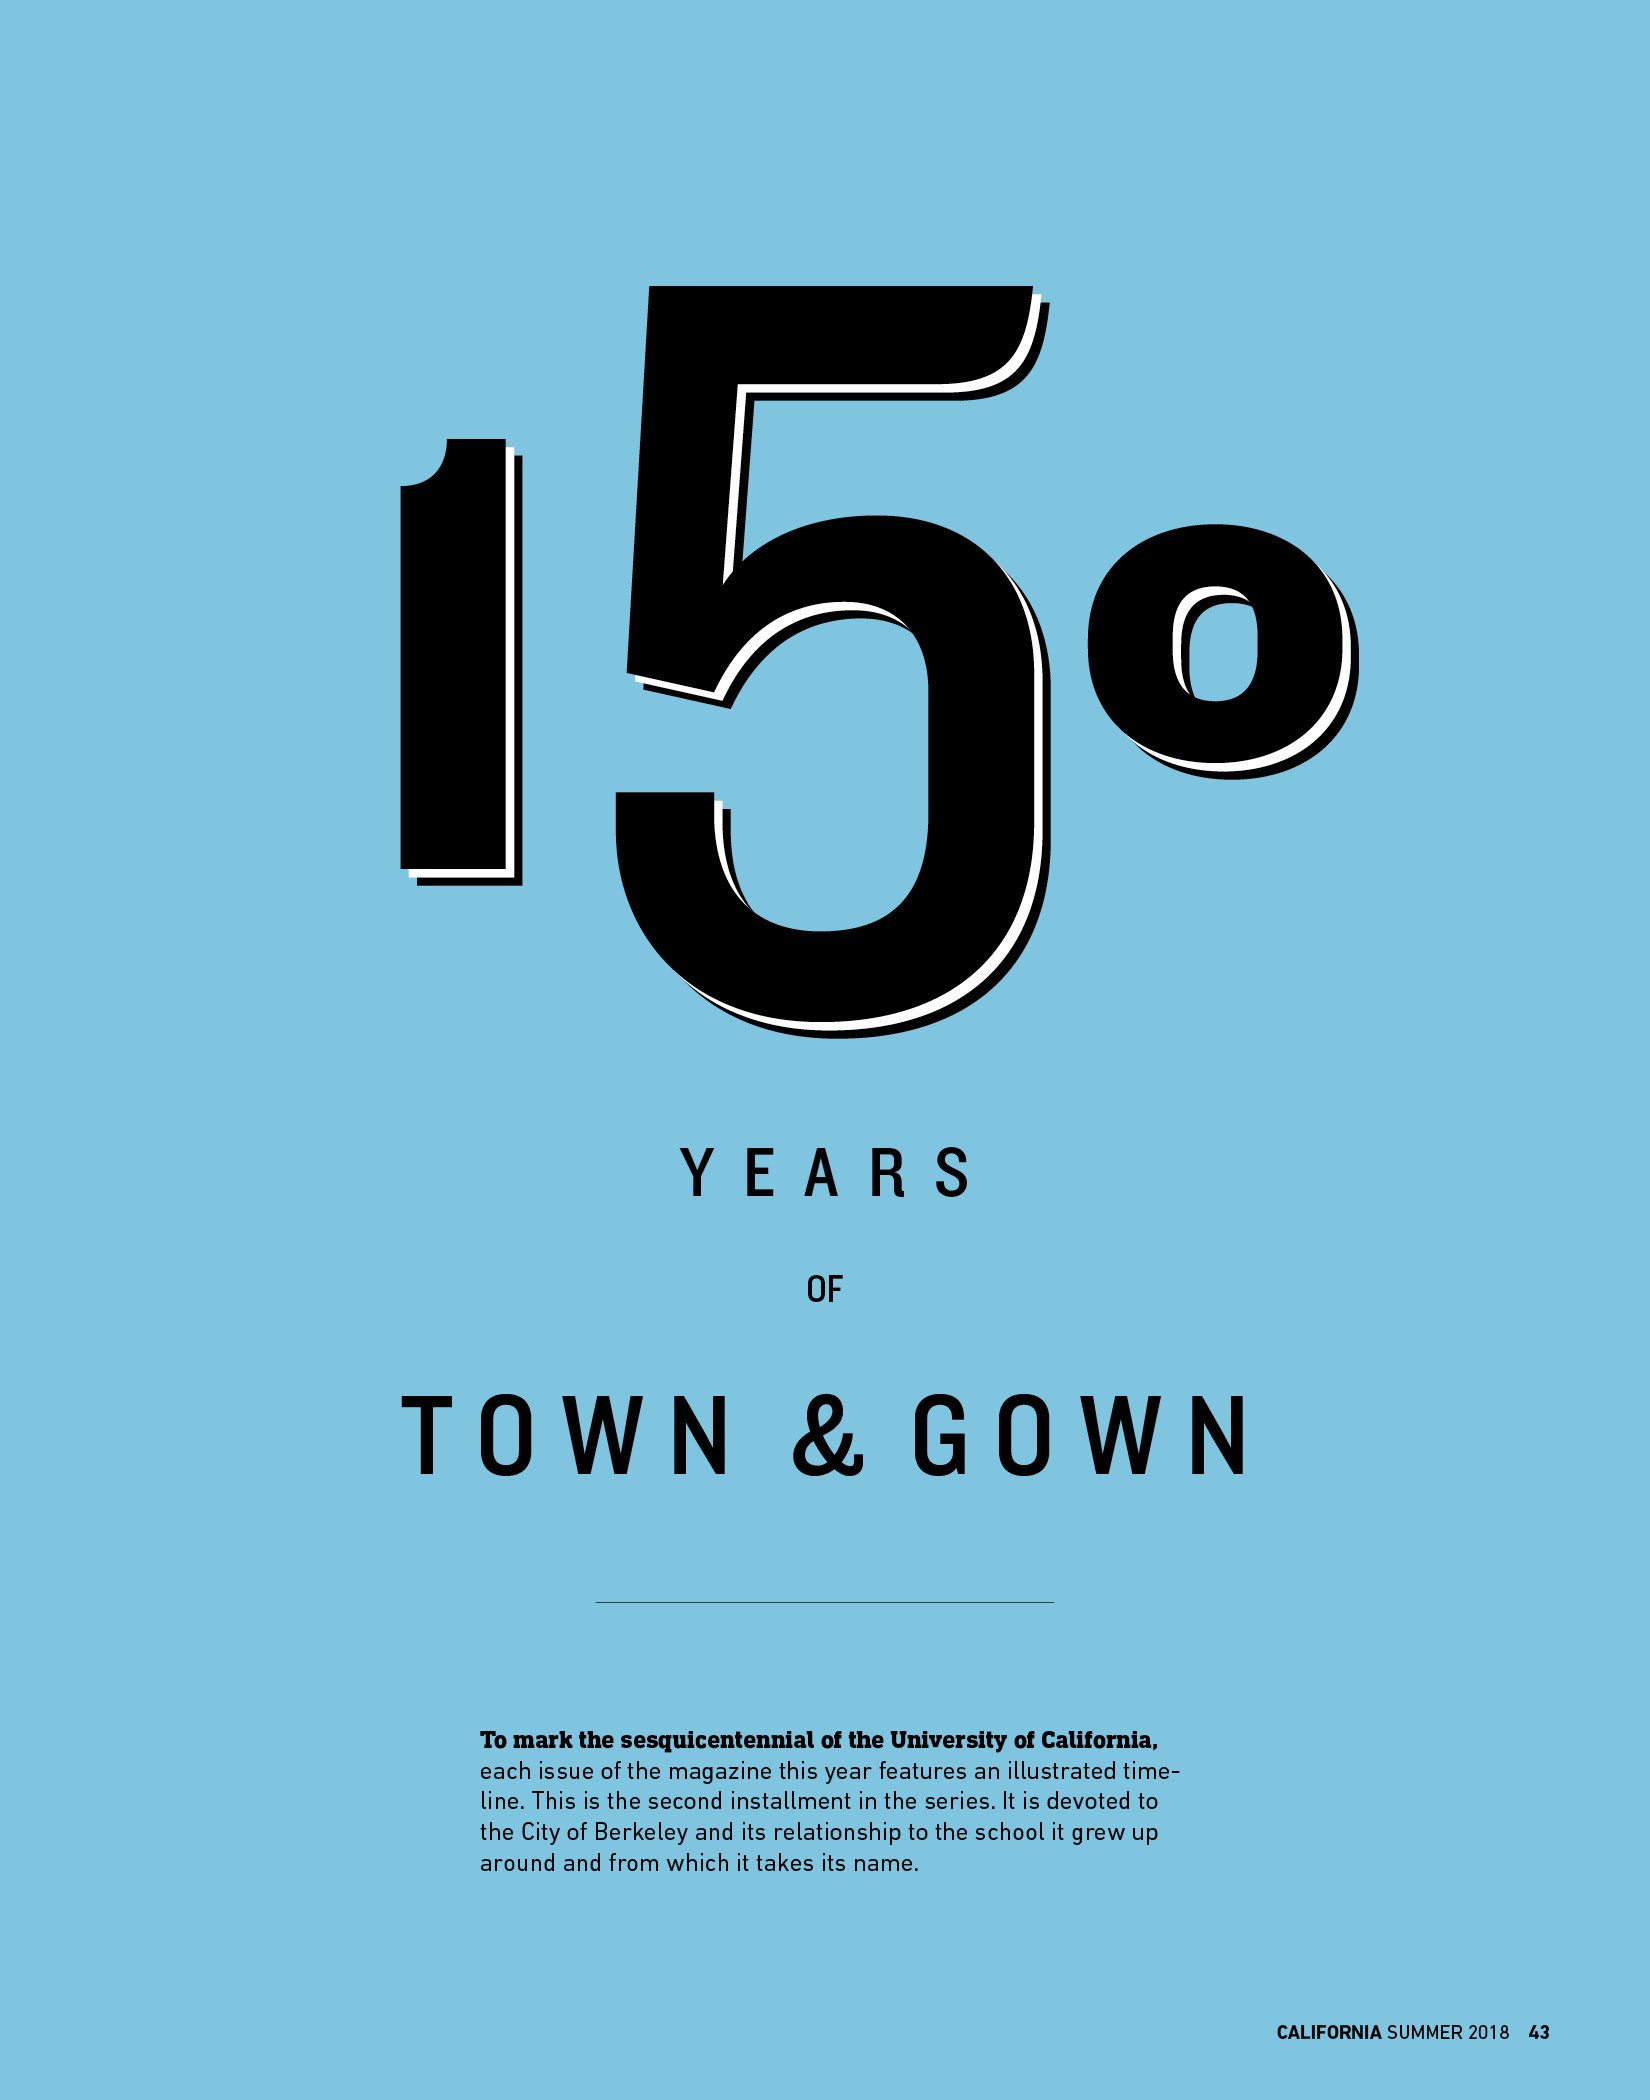 Town & Gown Timeline